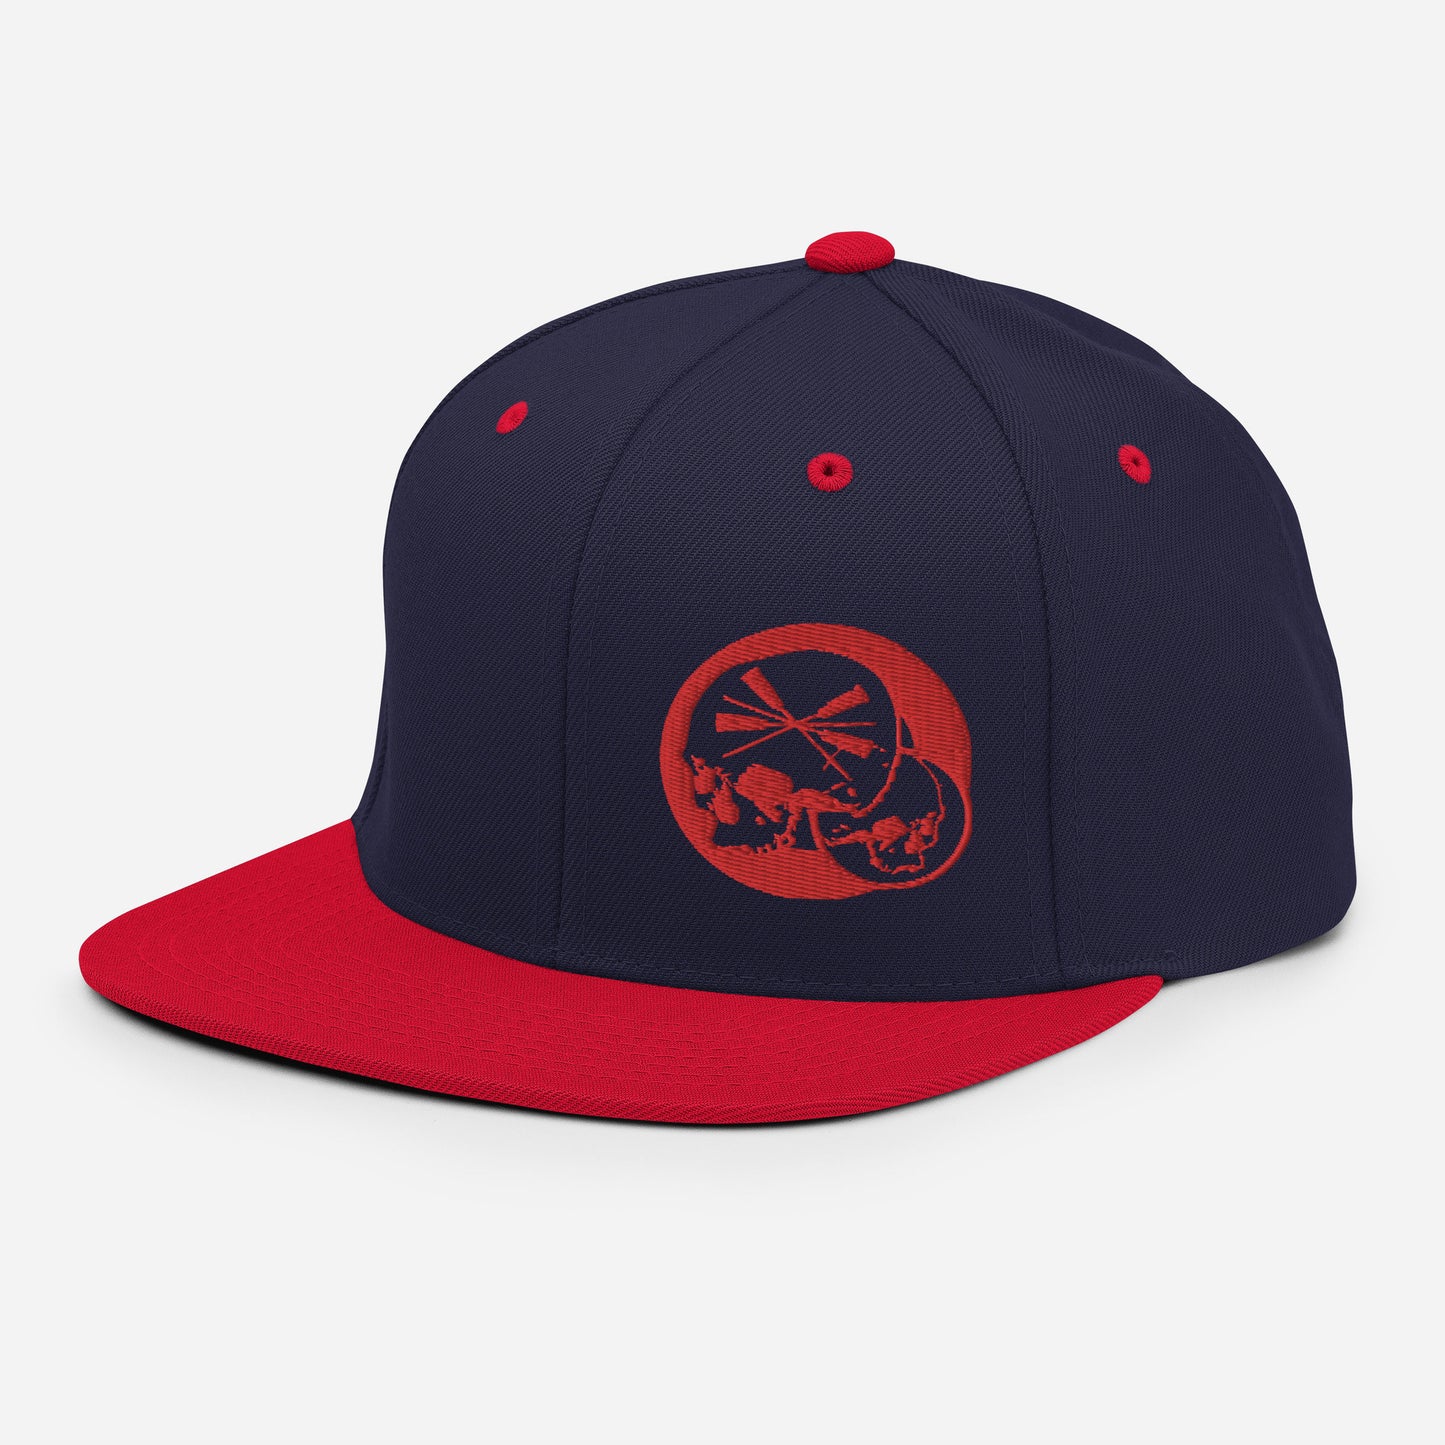 Casquette Snapback Brodé rouge The Needles Factory Free Shipping